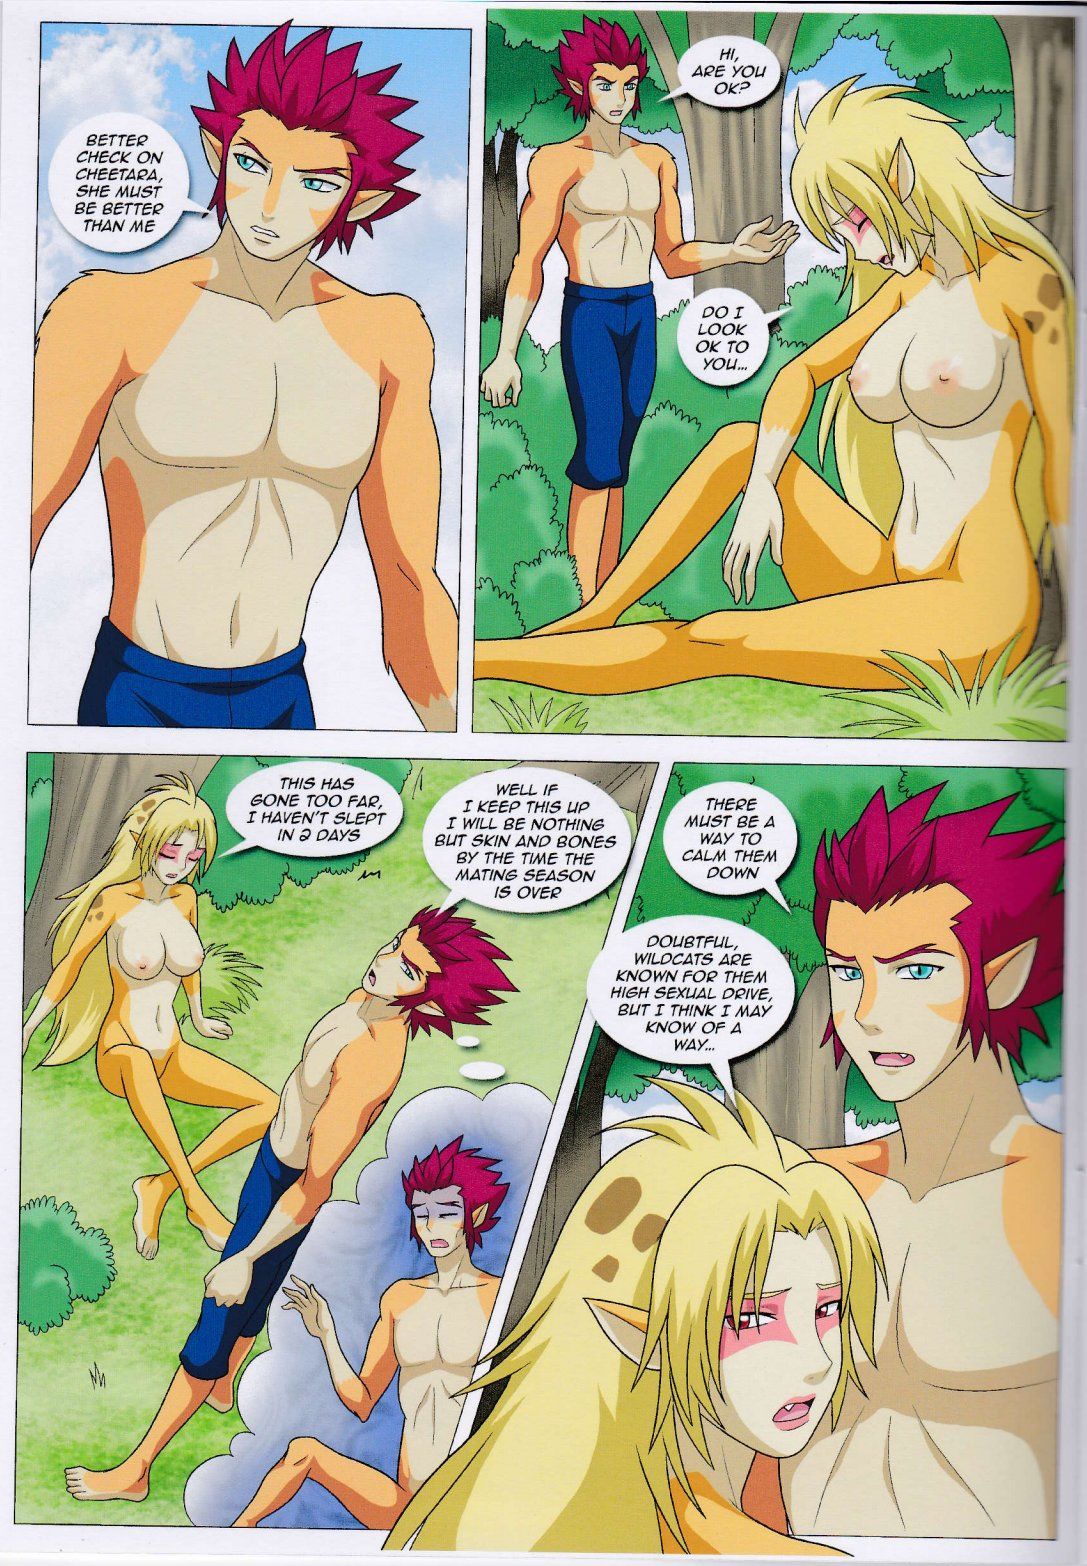 Thundercats - Break Time - Furry Sex page 5